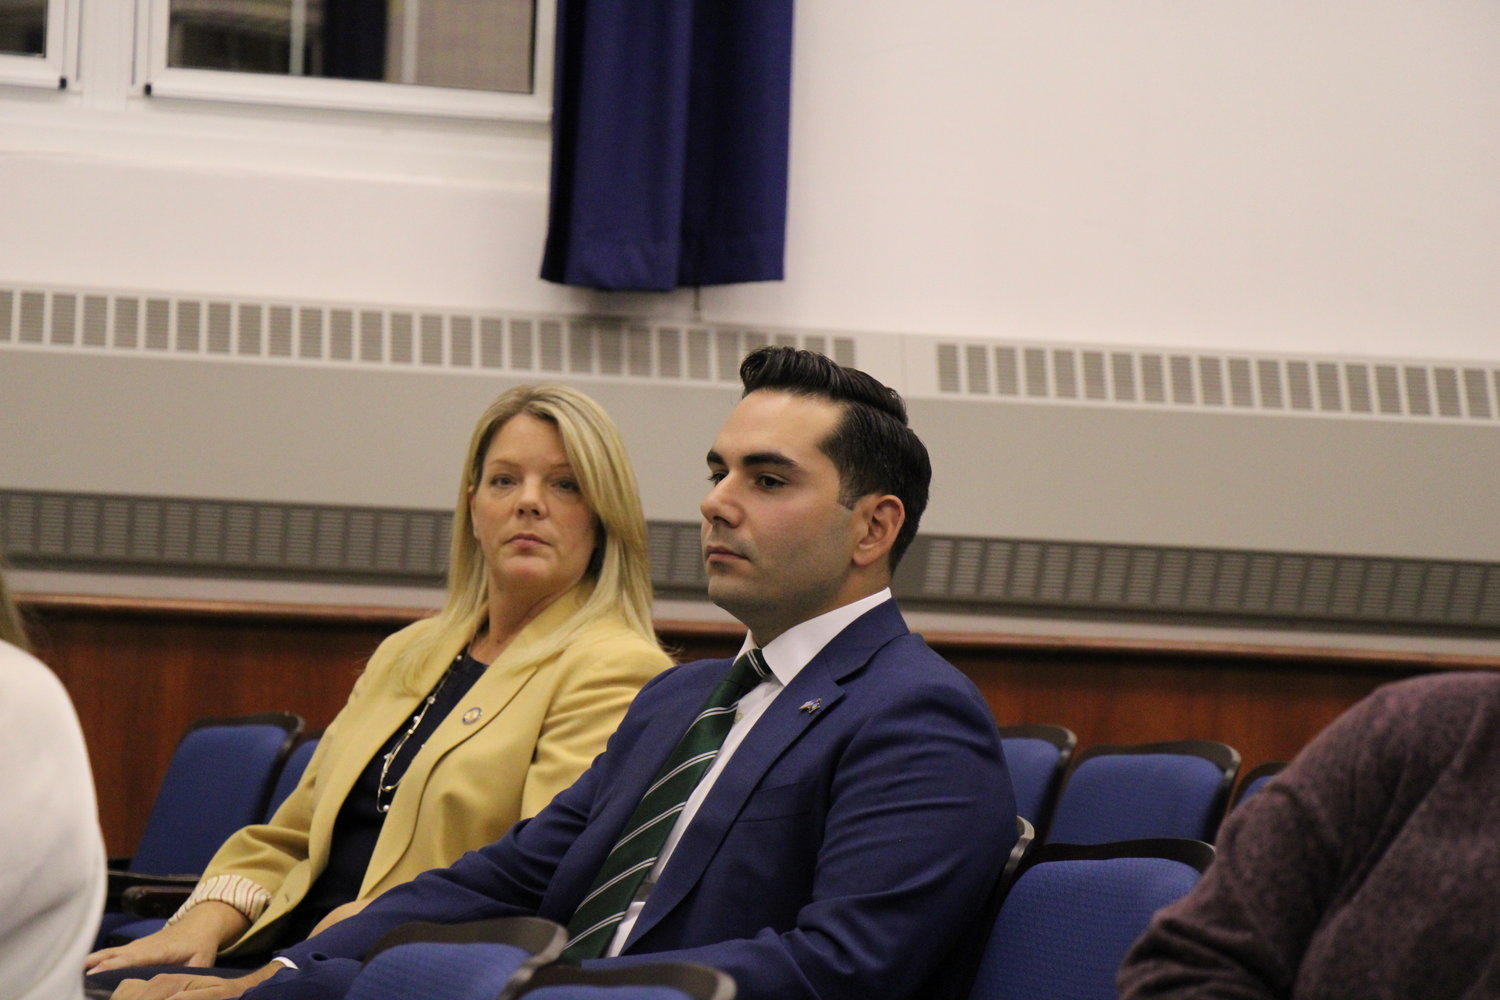 State Senator Alexis Weik (R-3rd District) and State Assemblyman Jarett Gandalfo (R-7th District) were in attendance for the tri-civic association Meet the Candidates Night.